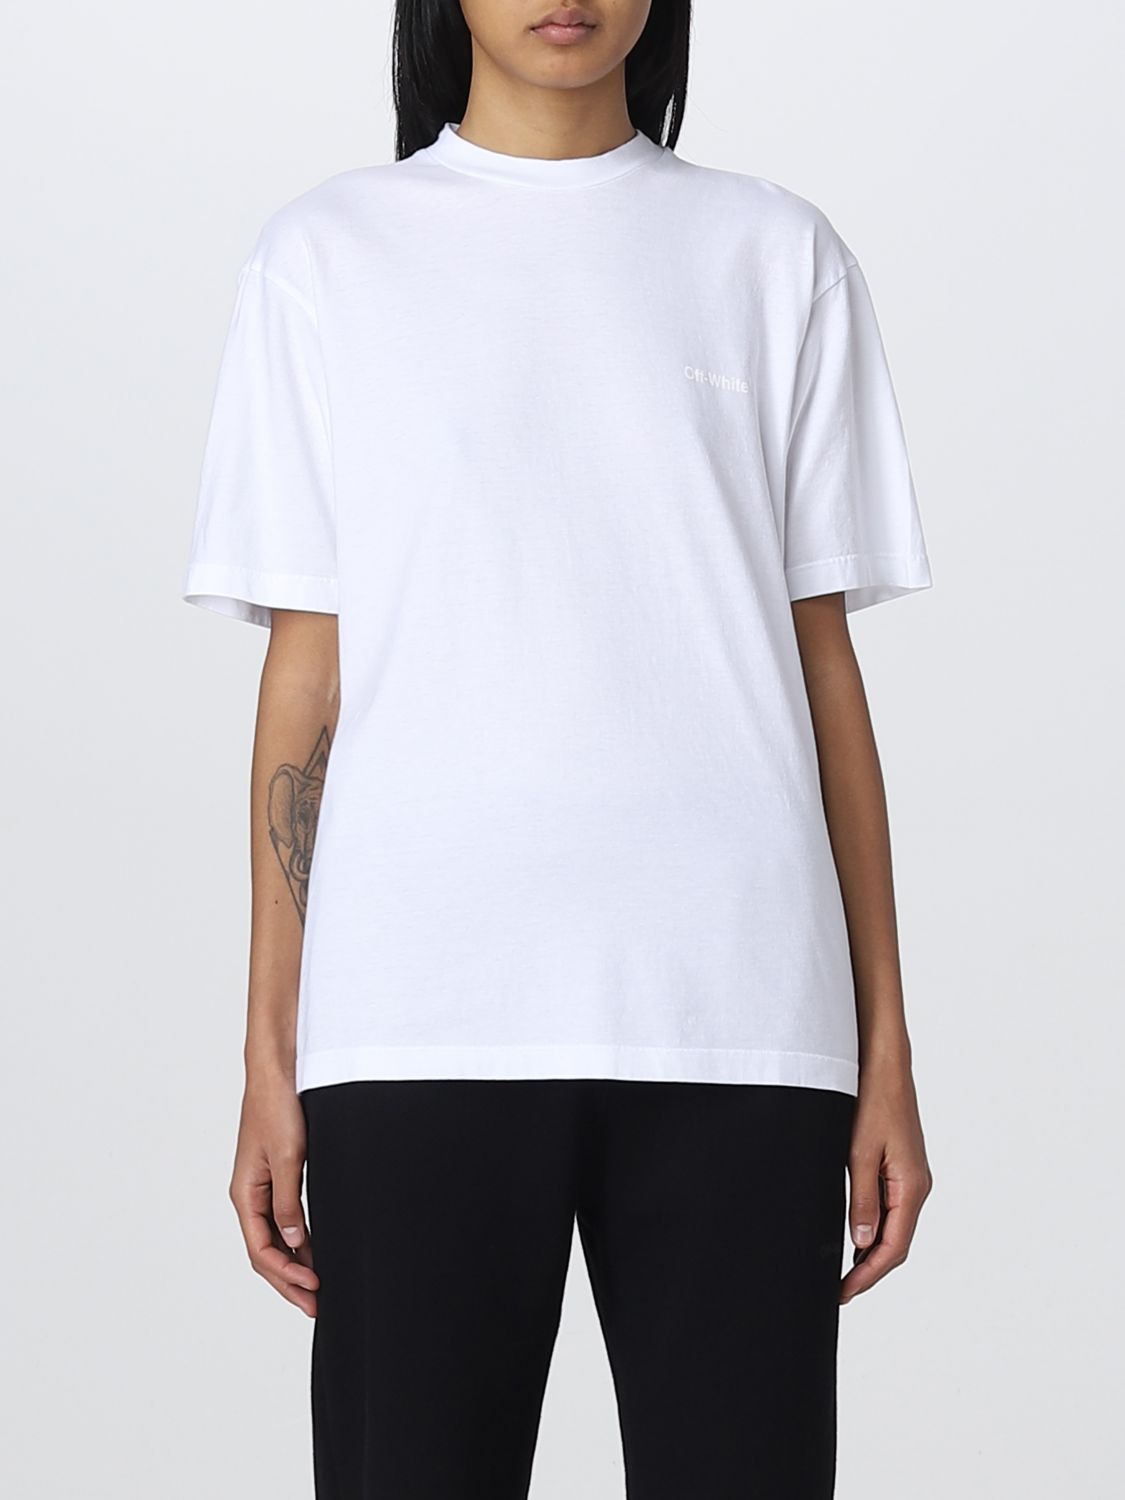 OFF-WHITE T-SHIRT WITH LOGO,377074001